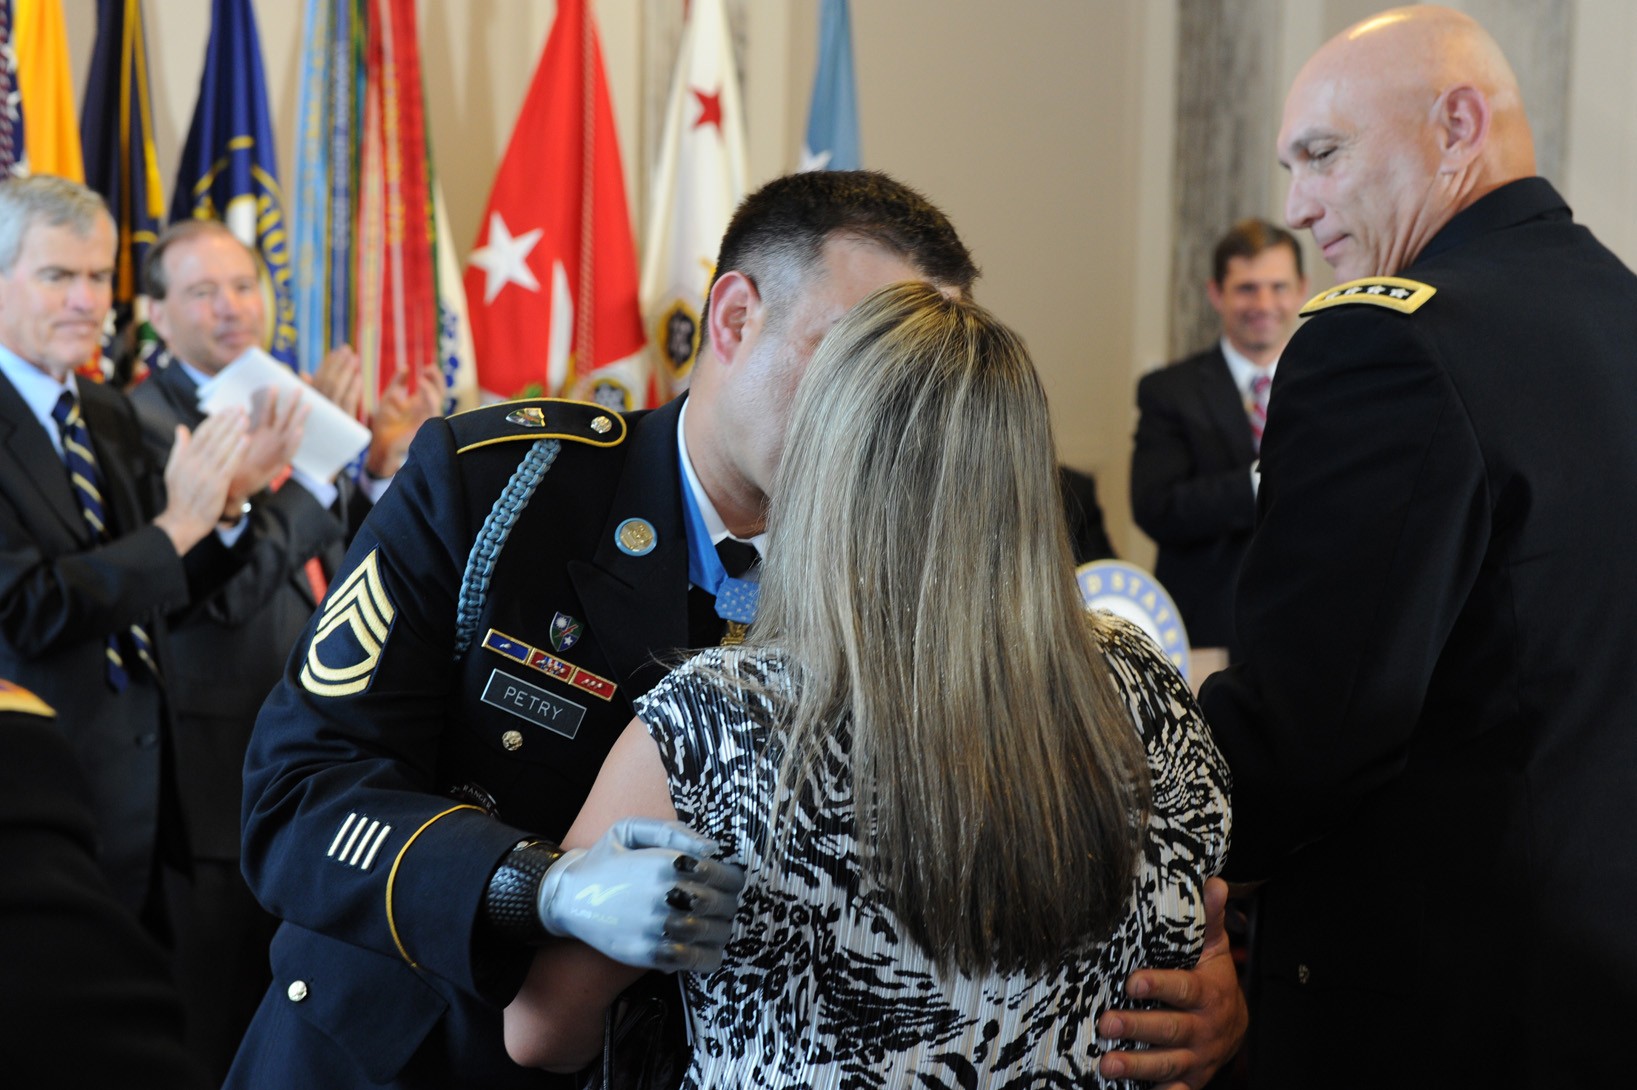 New Mexico soldier latest MOH recipient